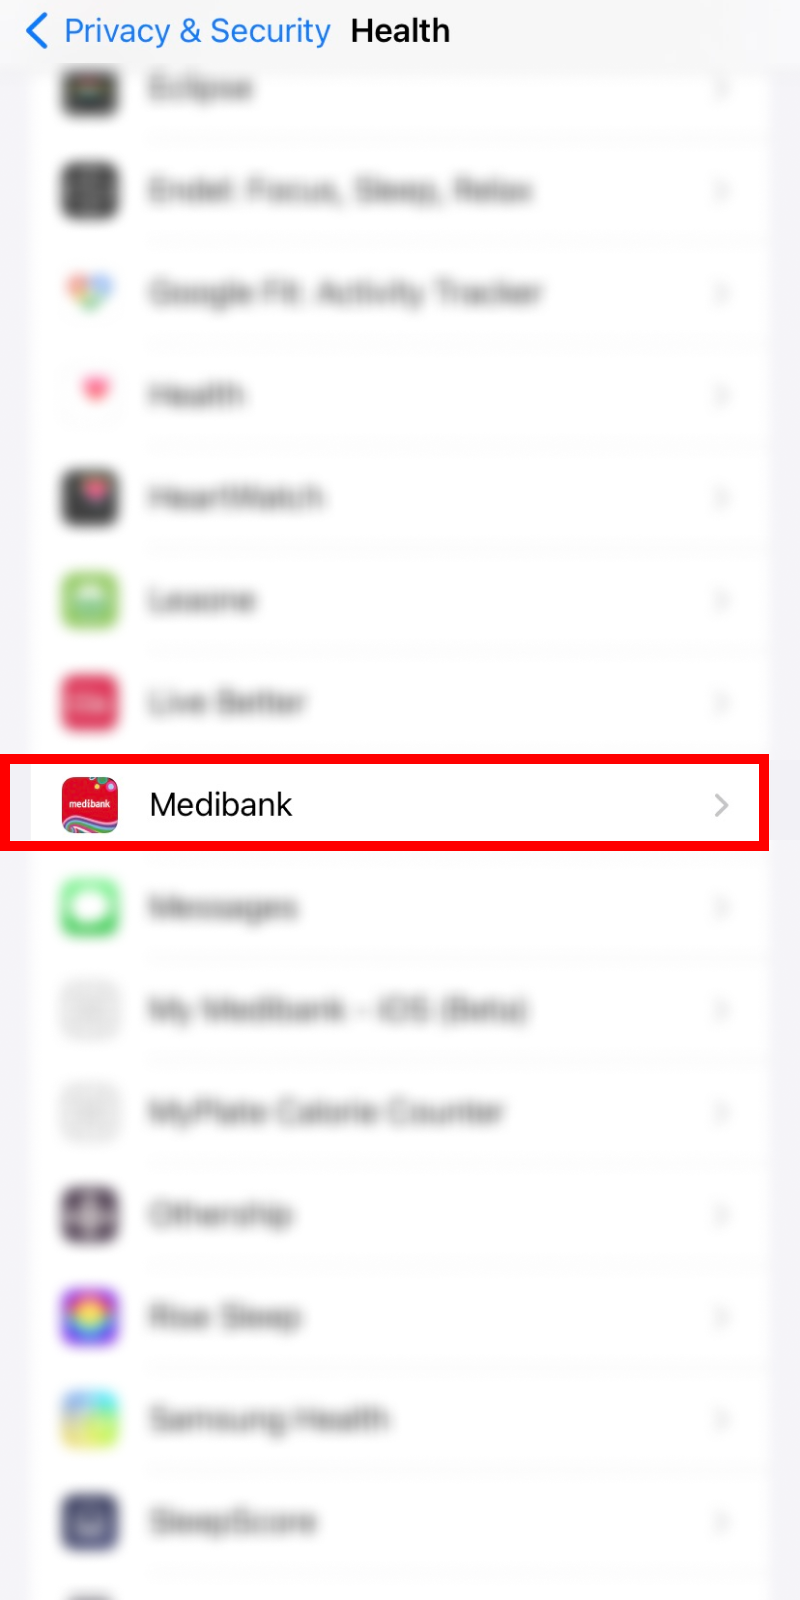 Medibank option under Health, under Privacy & Security settings app on iPhone